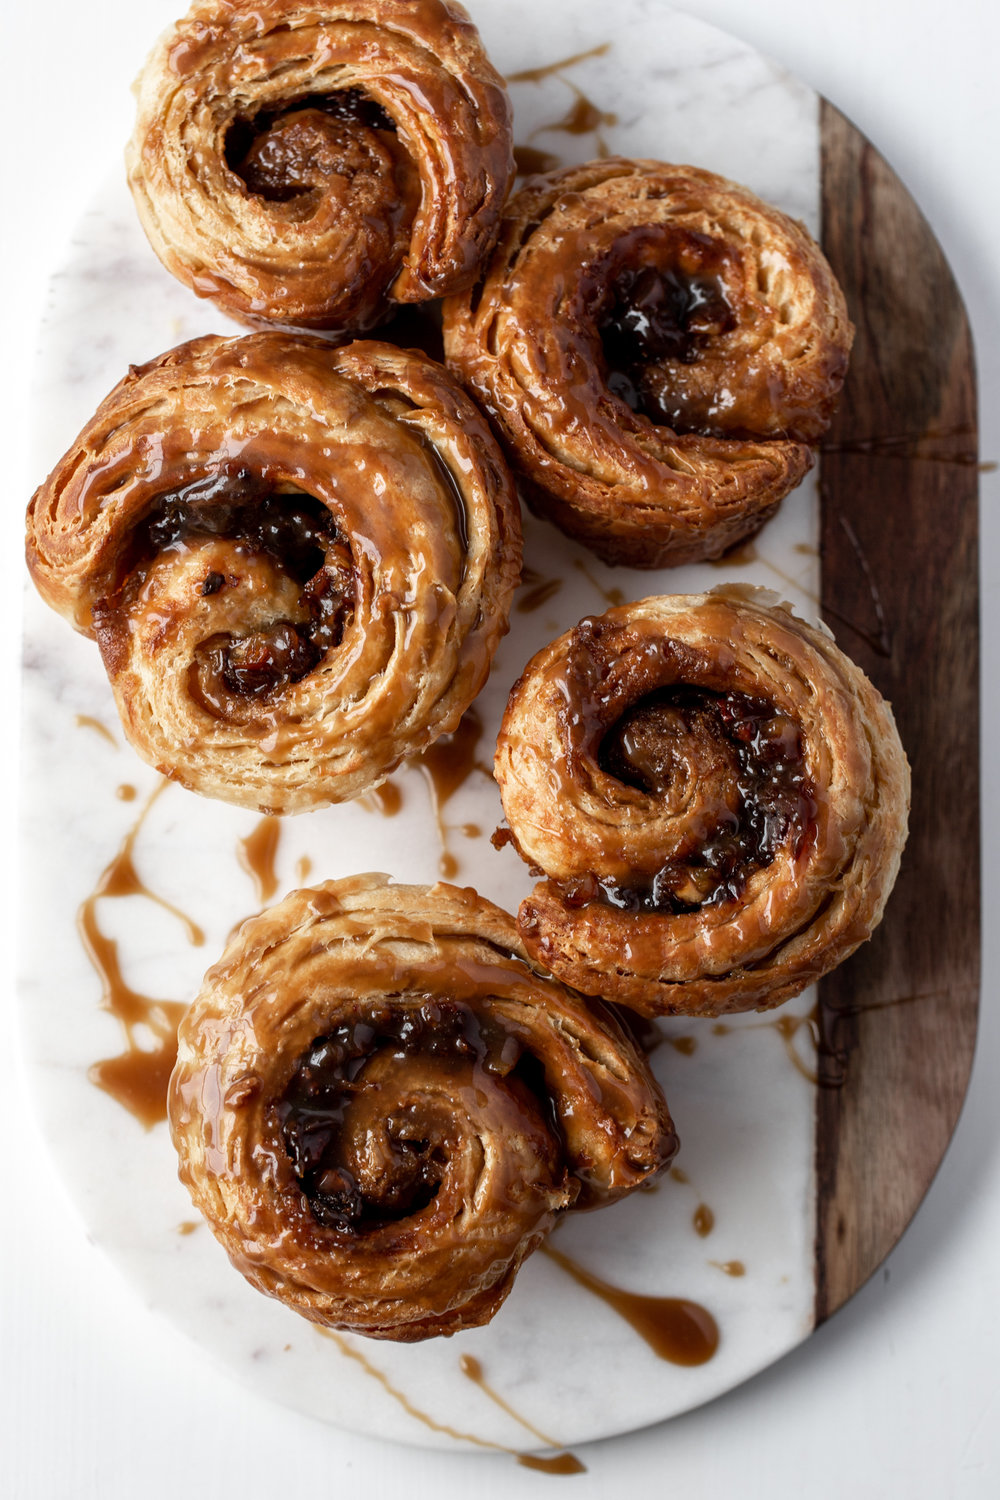 morning bun recipe inspired by sticky toffee pudding, croissant dough is stuffed with filling with dates baked in muffin tins.